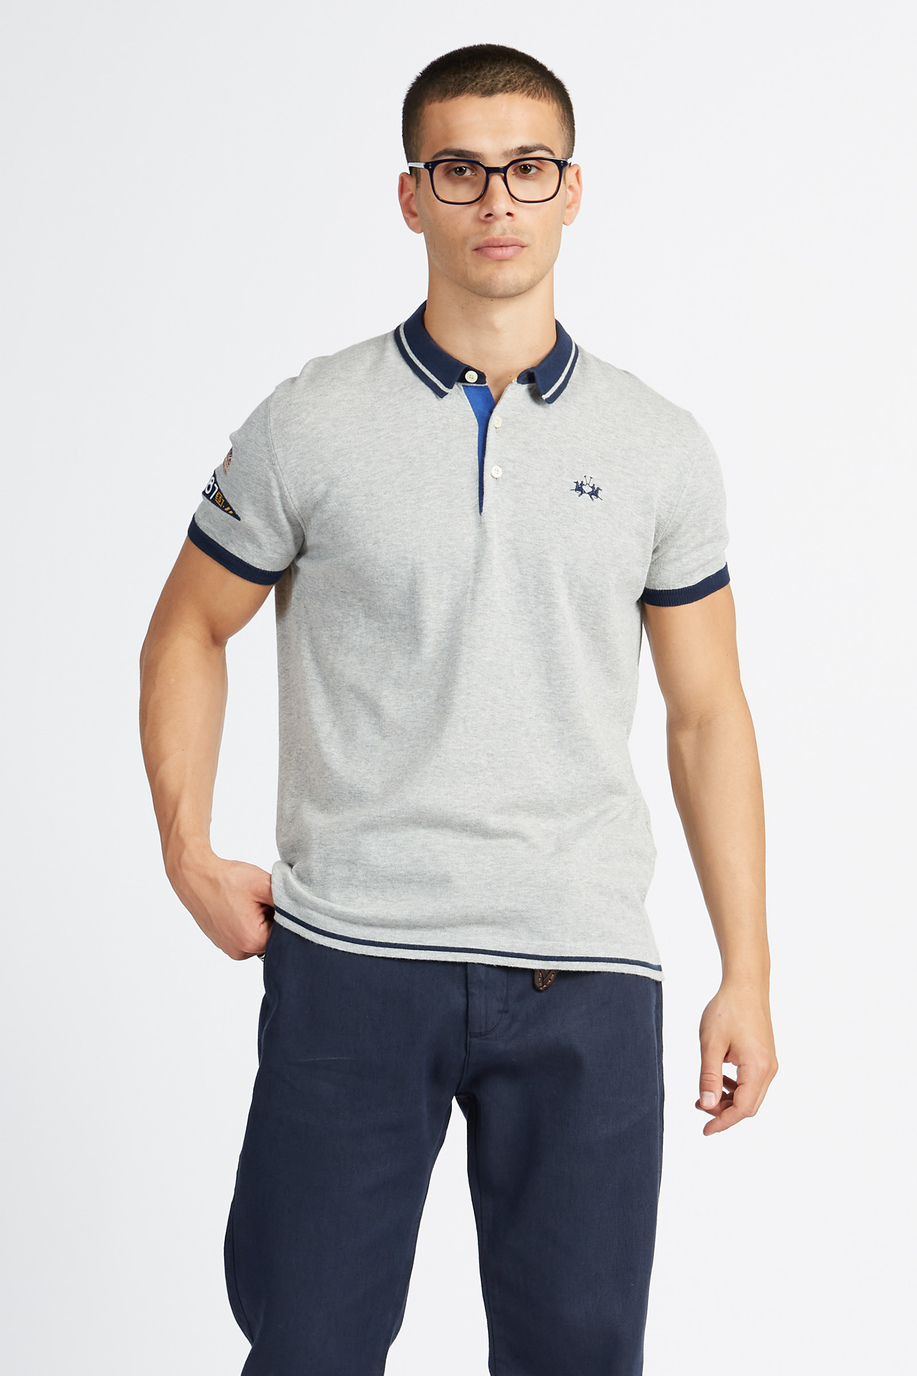 Short-sleeved men's tricot polo in solid color - Victorin - Polo Shirts | La Martina - Official Online Shop